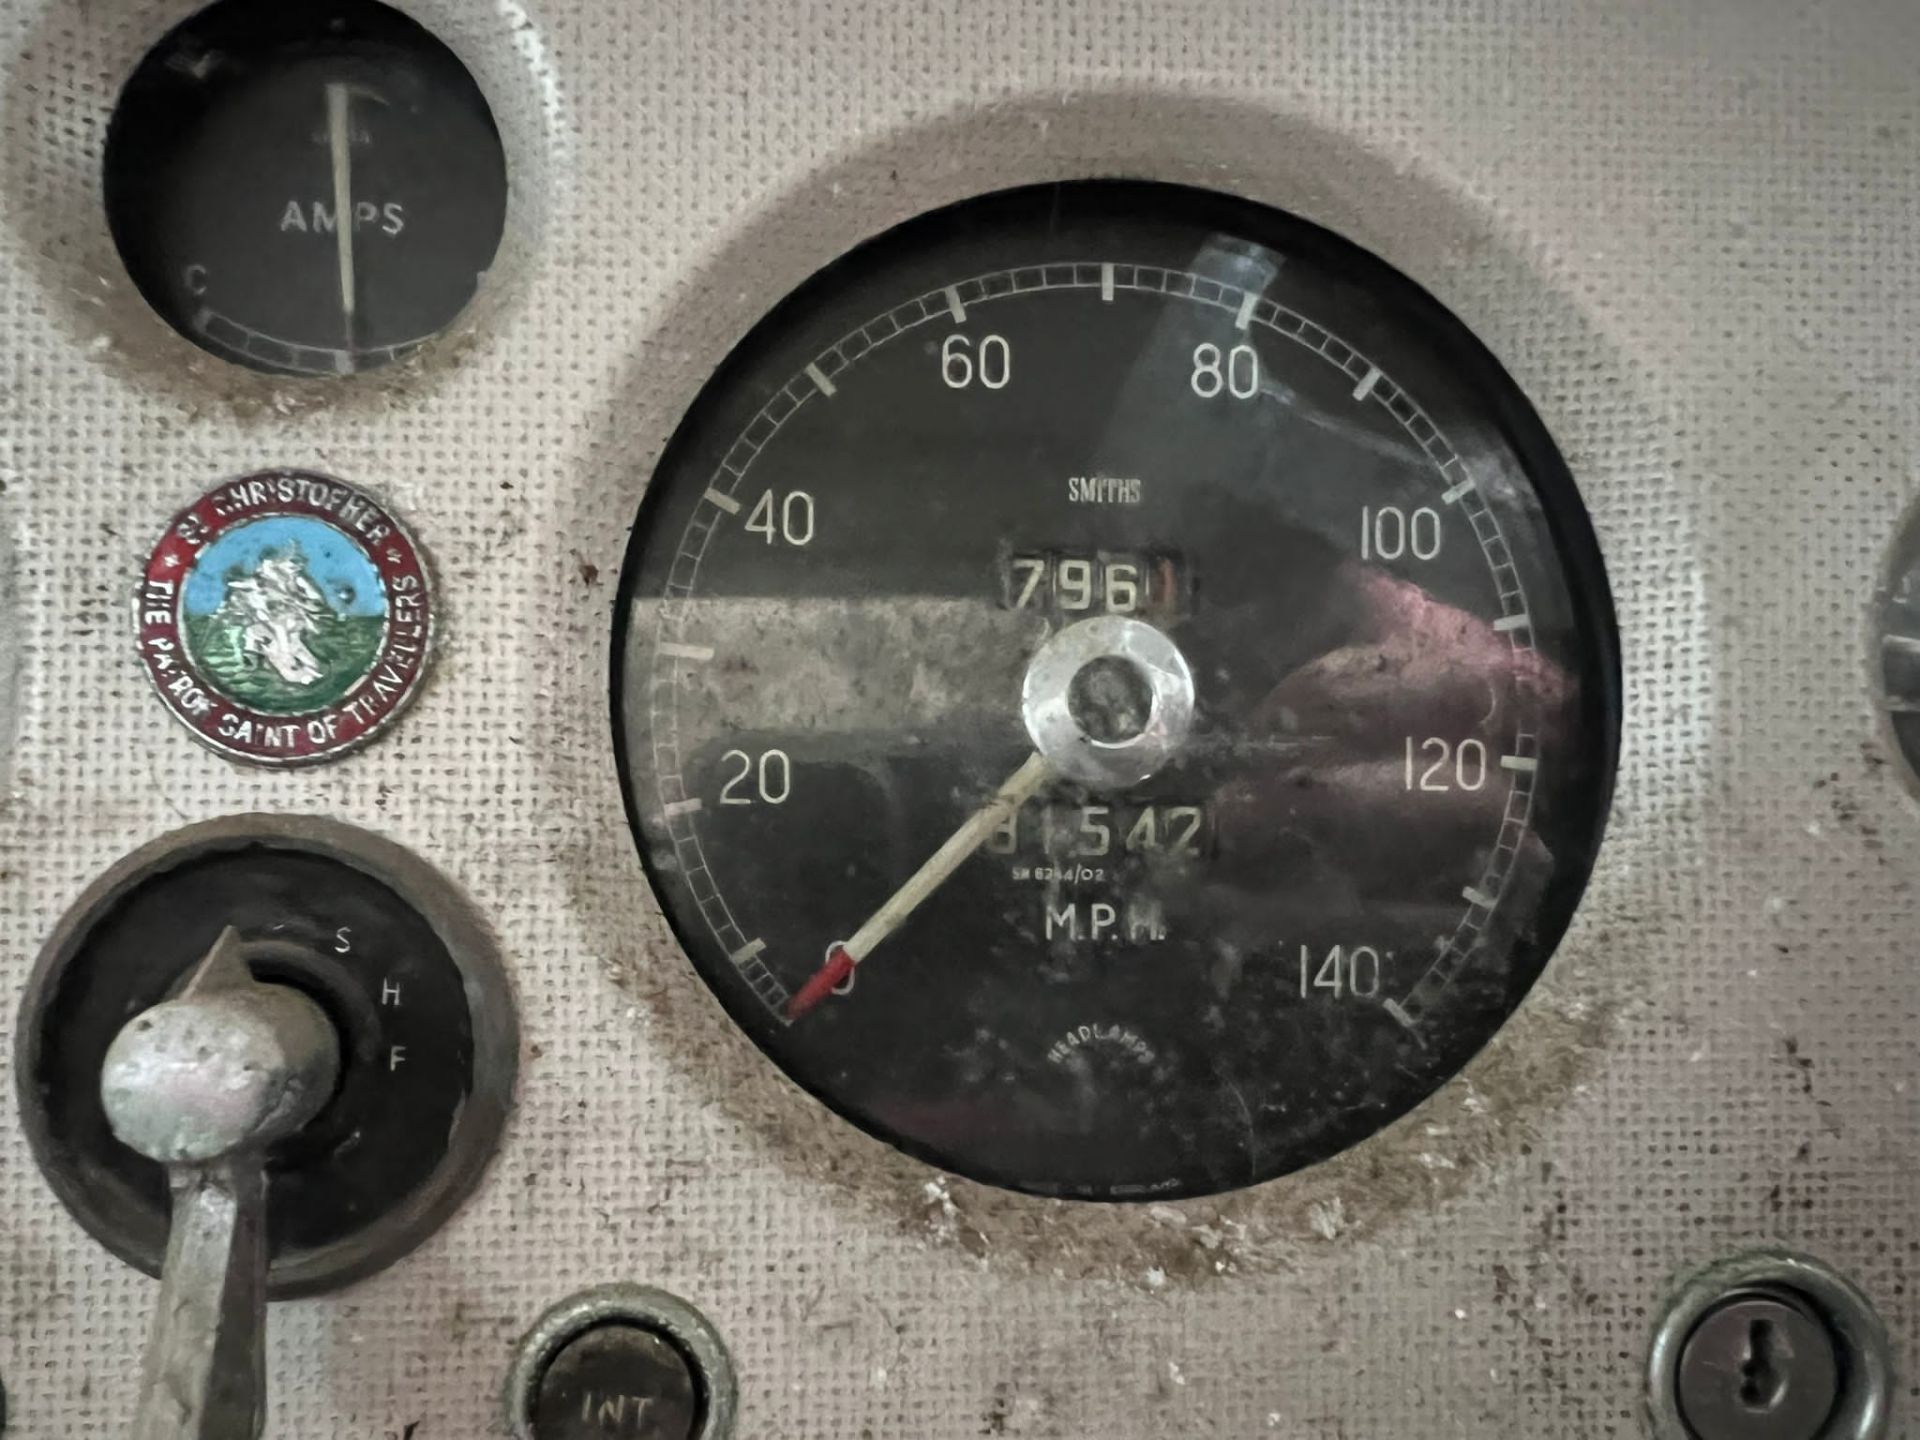 Jaguar XK150 3.4 Drop Head Coupe 1958 Barn Find. Matching numbers. - Image 13 of 27